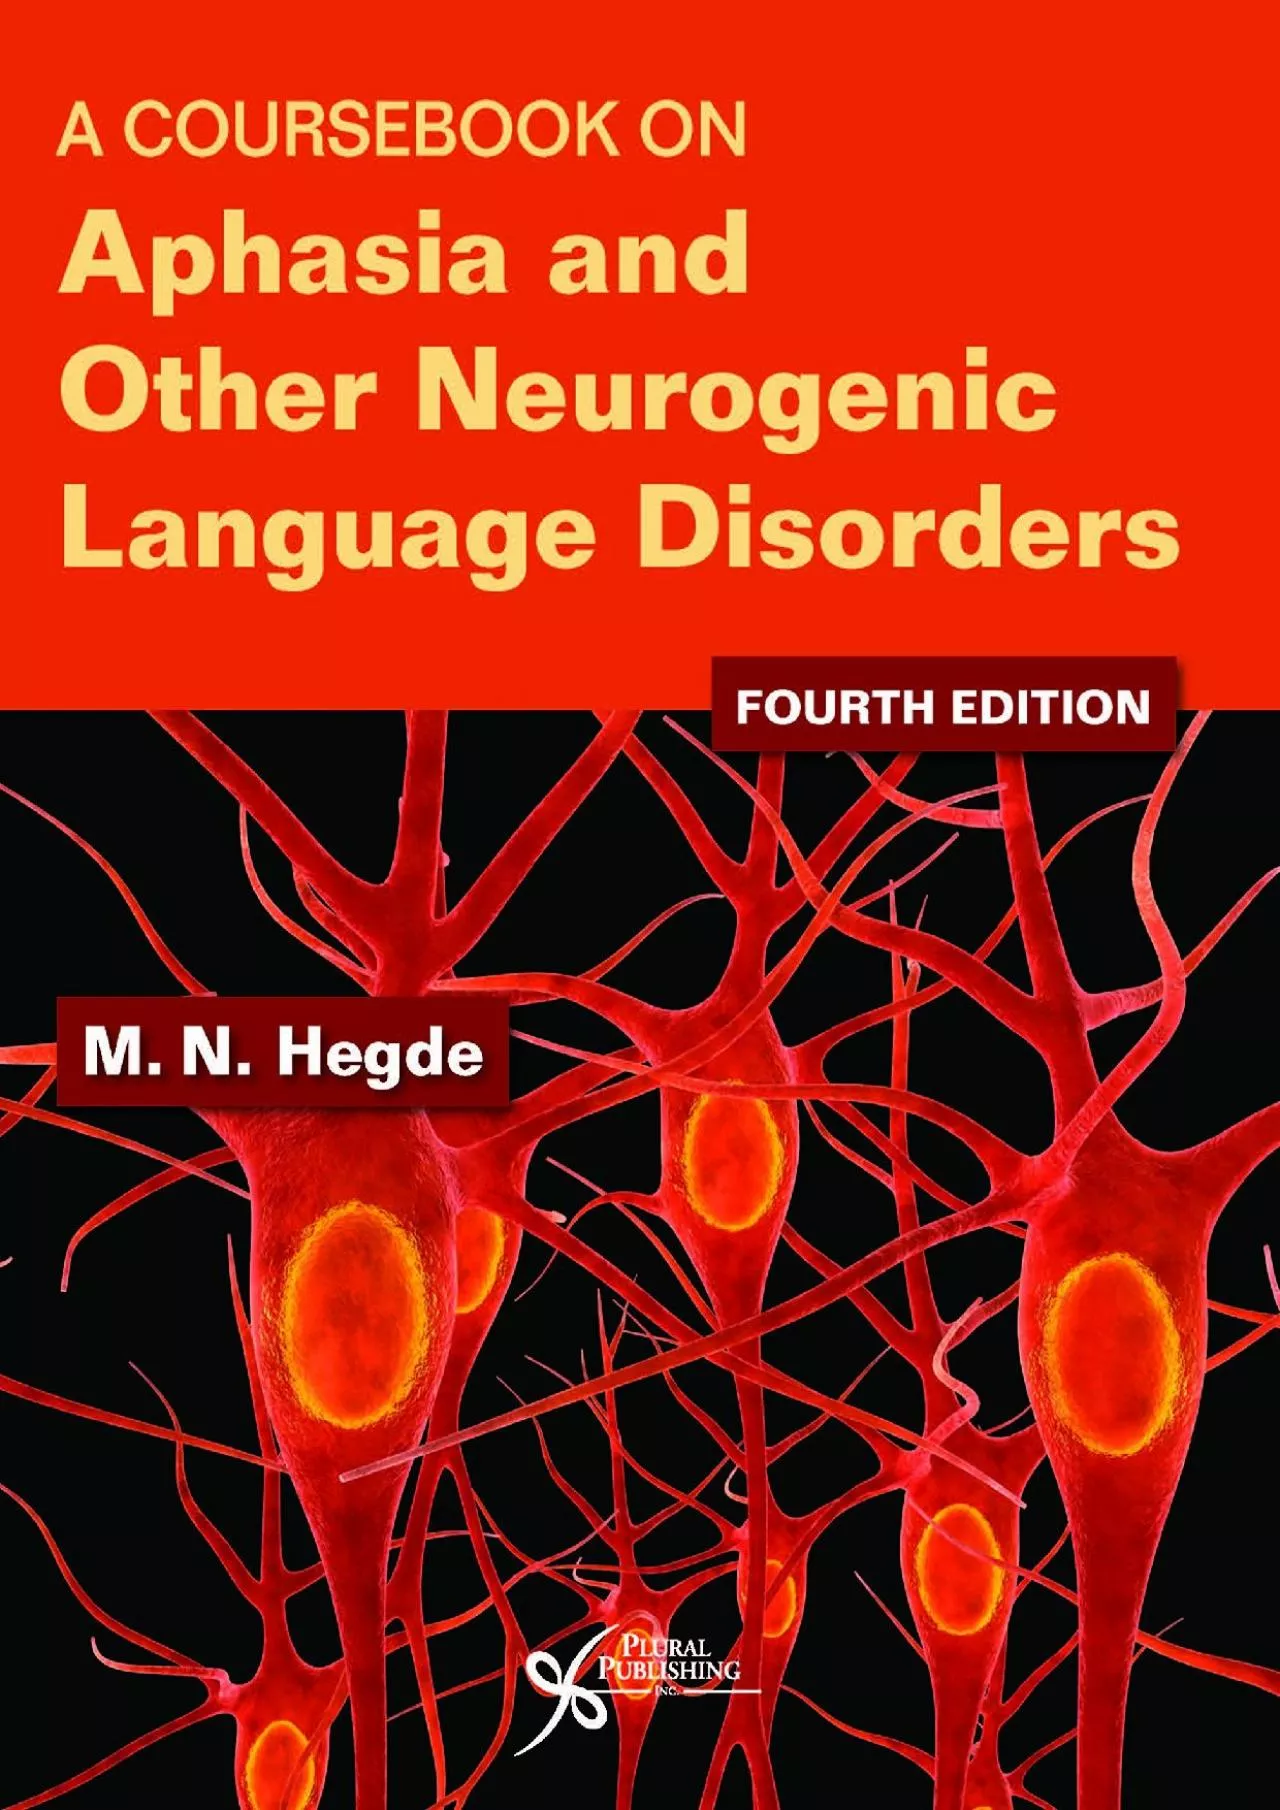 (BOOK)-A Coursebook on Aphasia and Other Neurogenic Language Disorders